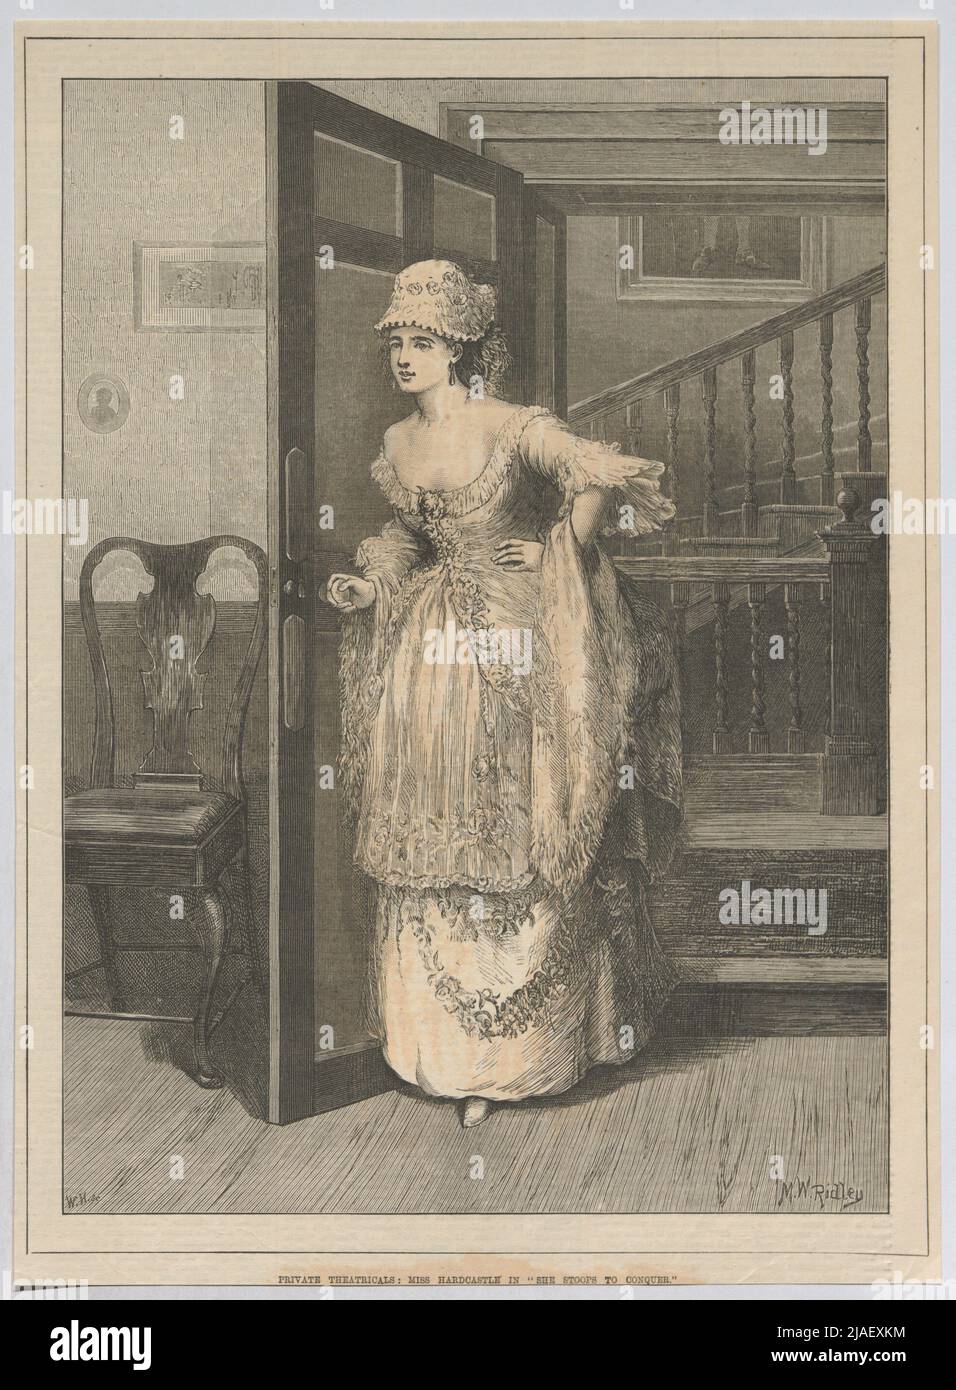 PRIVATE THEATRICALS: MISS HARDCASTLE IN 'SHE STOOPS TO CONQUER.''. Die Rolle der Miss Hardcastle in der Komödie 'She Stoops to Conquer' (aus 'Illustrated London News'). Unknown Stock Photo